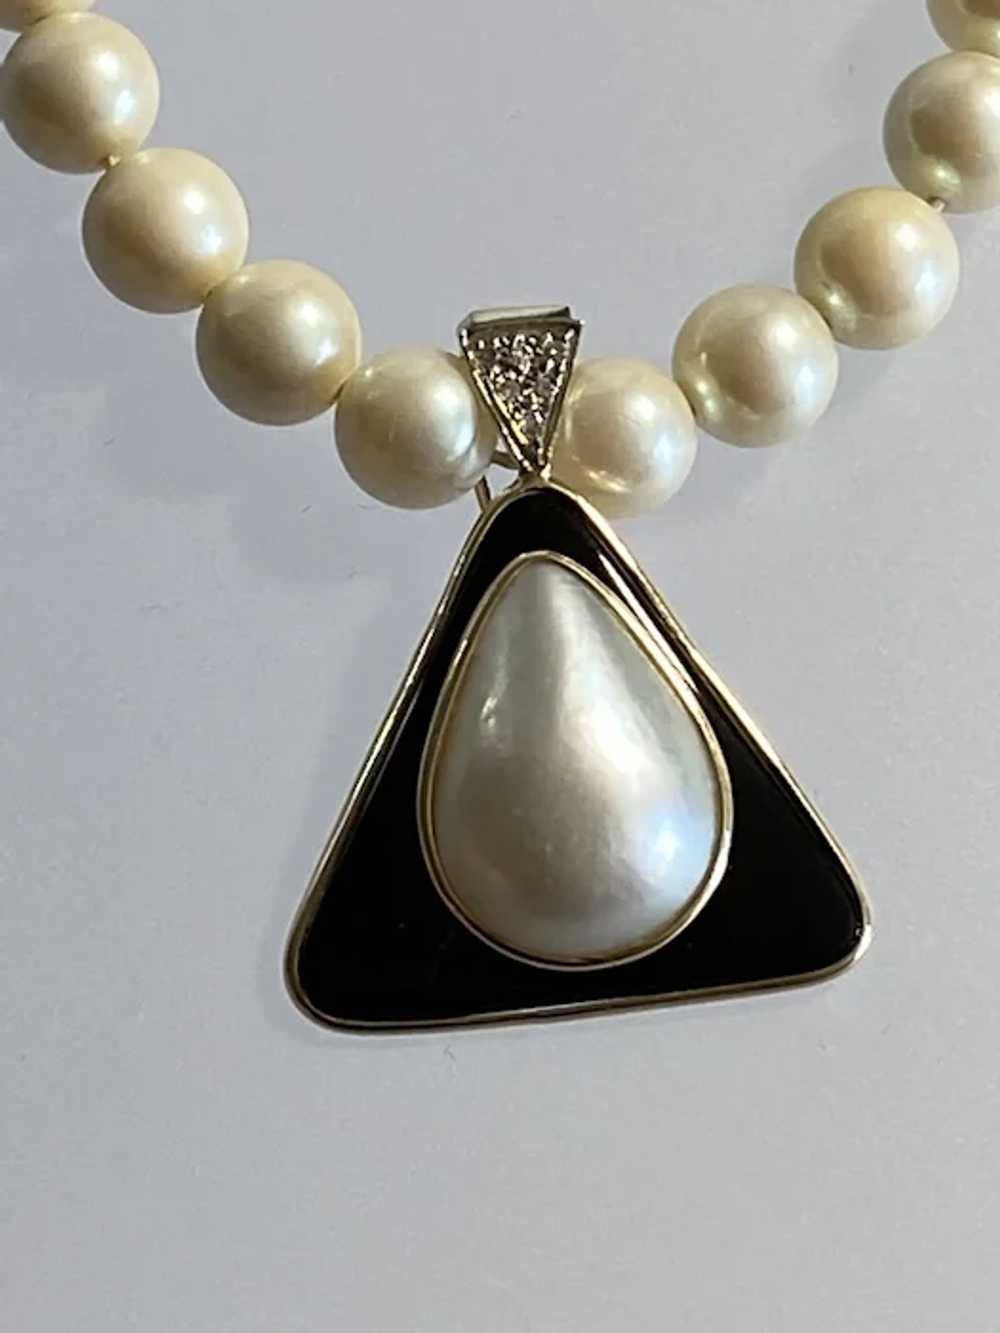 14K Yellow Gold Onyx and Pearl Pendant w/Enhancer - image 6